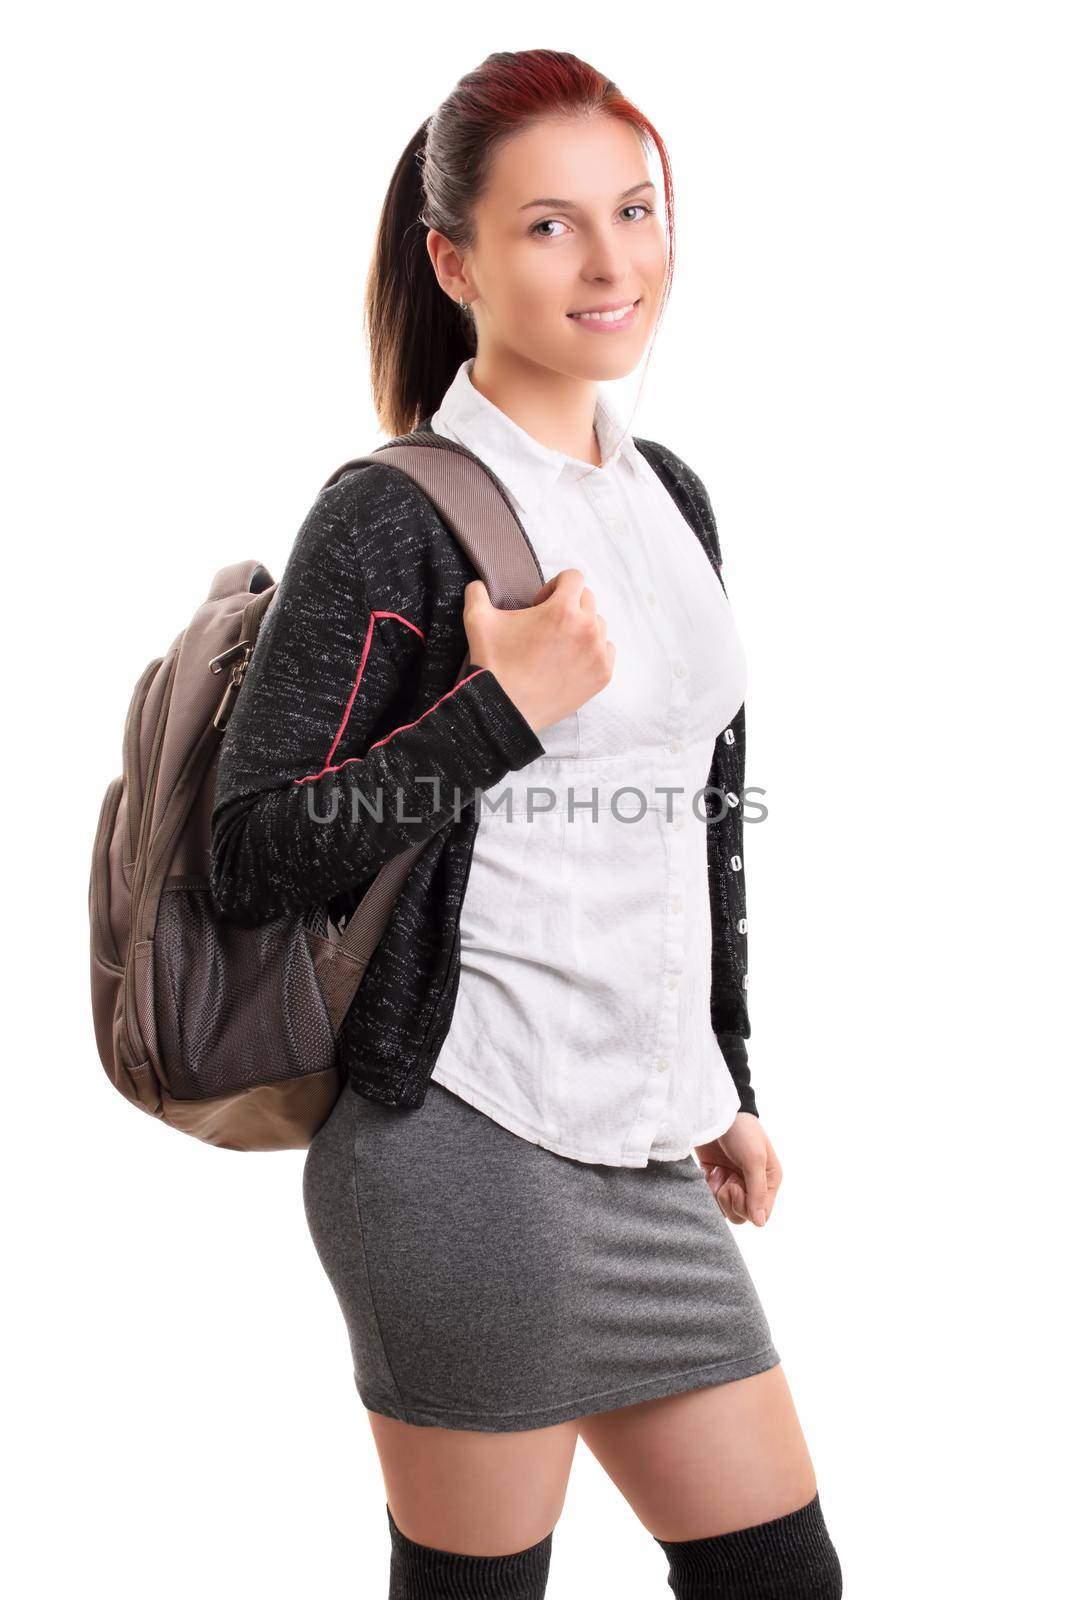 Smiling young female student with backpack by Mendelex